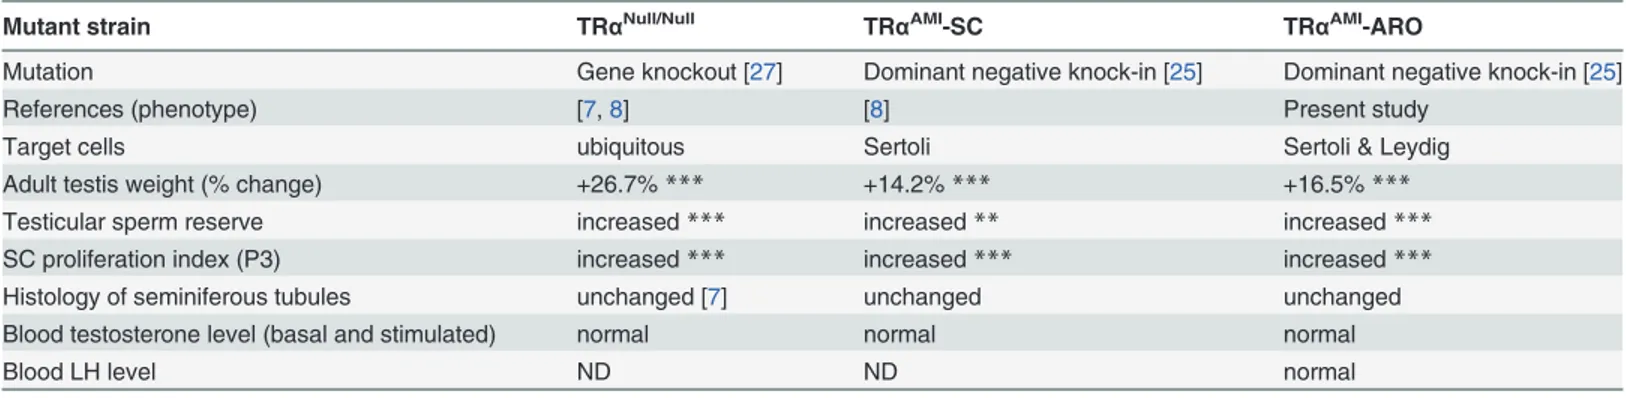 Table 2. Physiological, endocrine and cellular characteristics in TR α AMI -ARO (present study), TR α AMI -SC and TR α Null/Null transgenic lines.